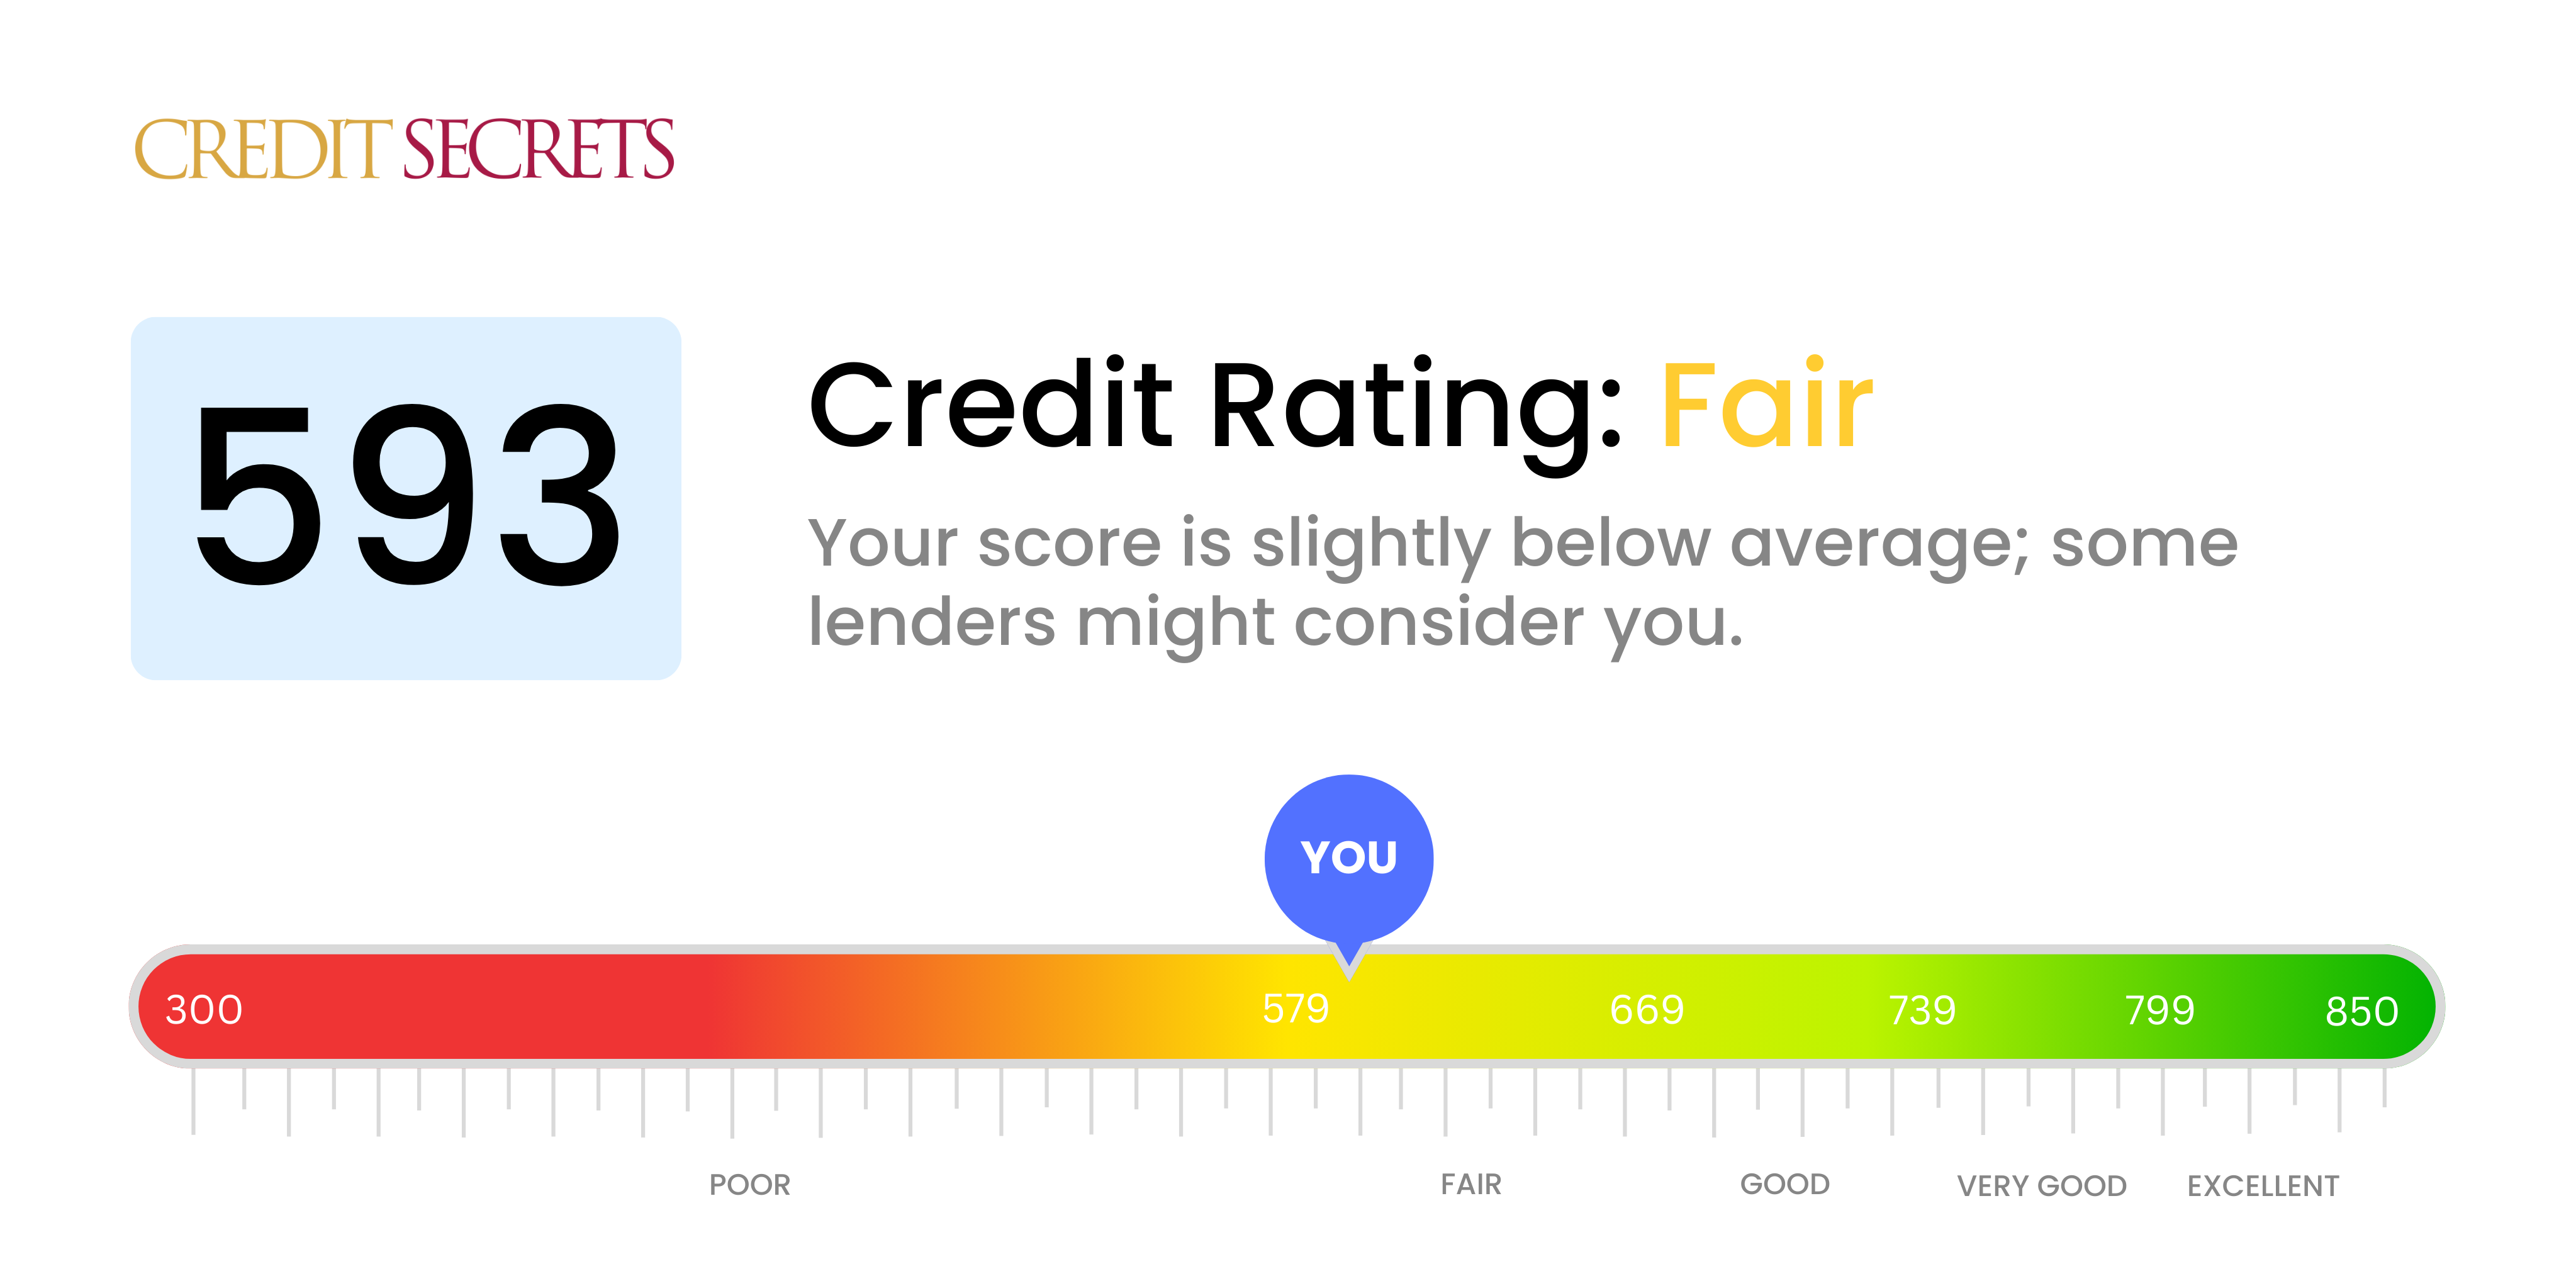 Is 593 a good credit score?